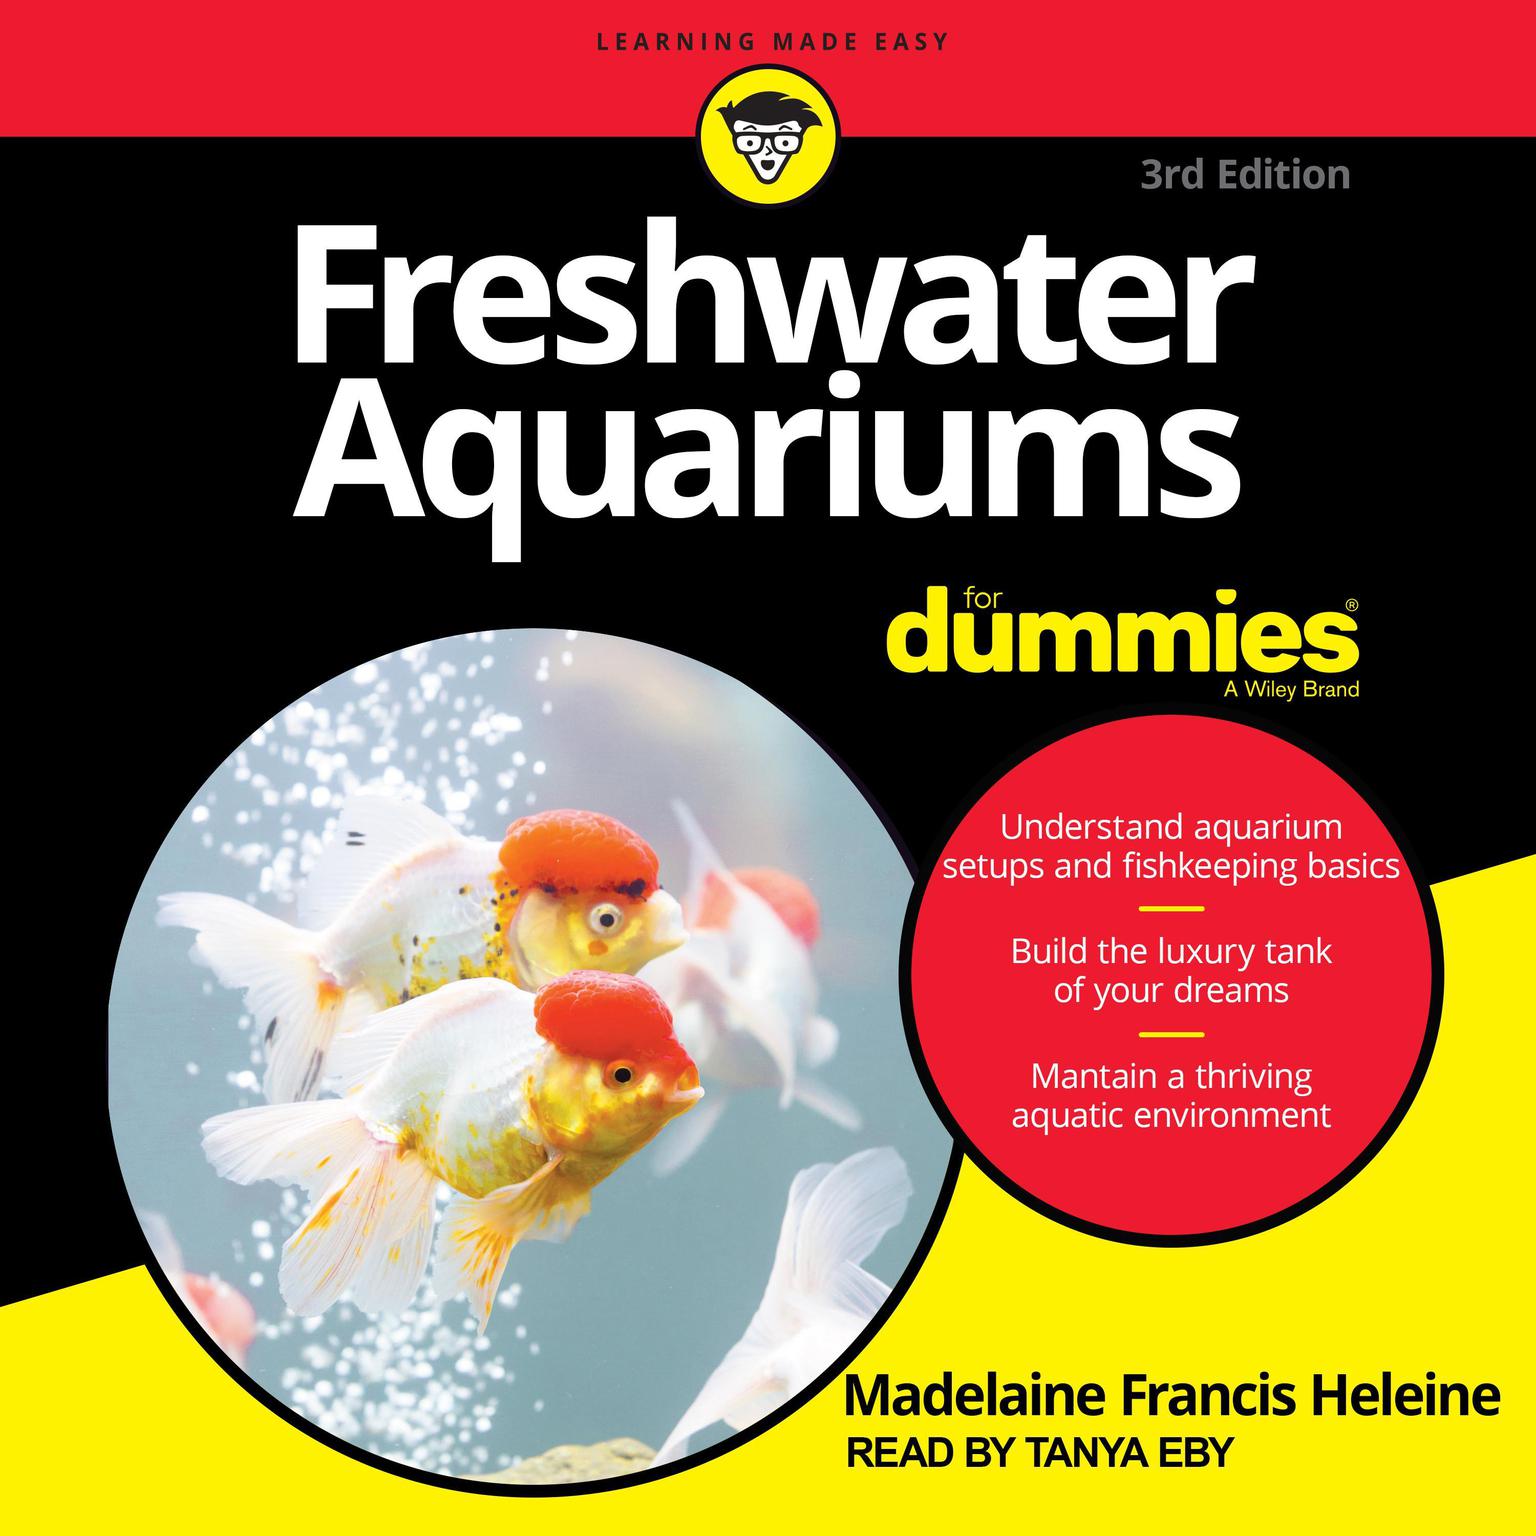 Freshwater Aquariums For Dummies: 3rd Edition Audiobook, by Madelaine Francis Heleine